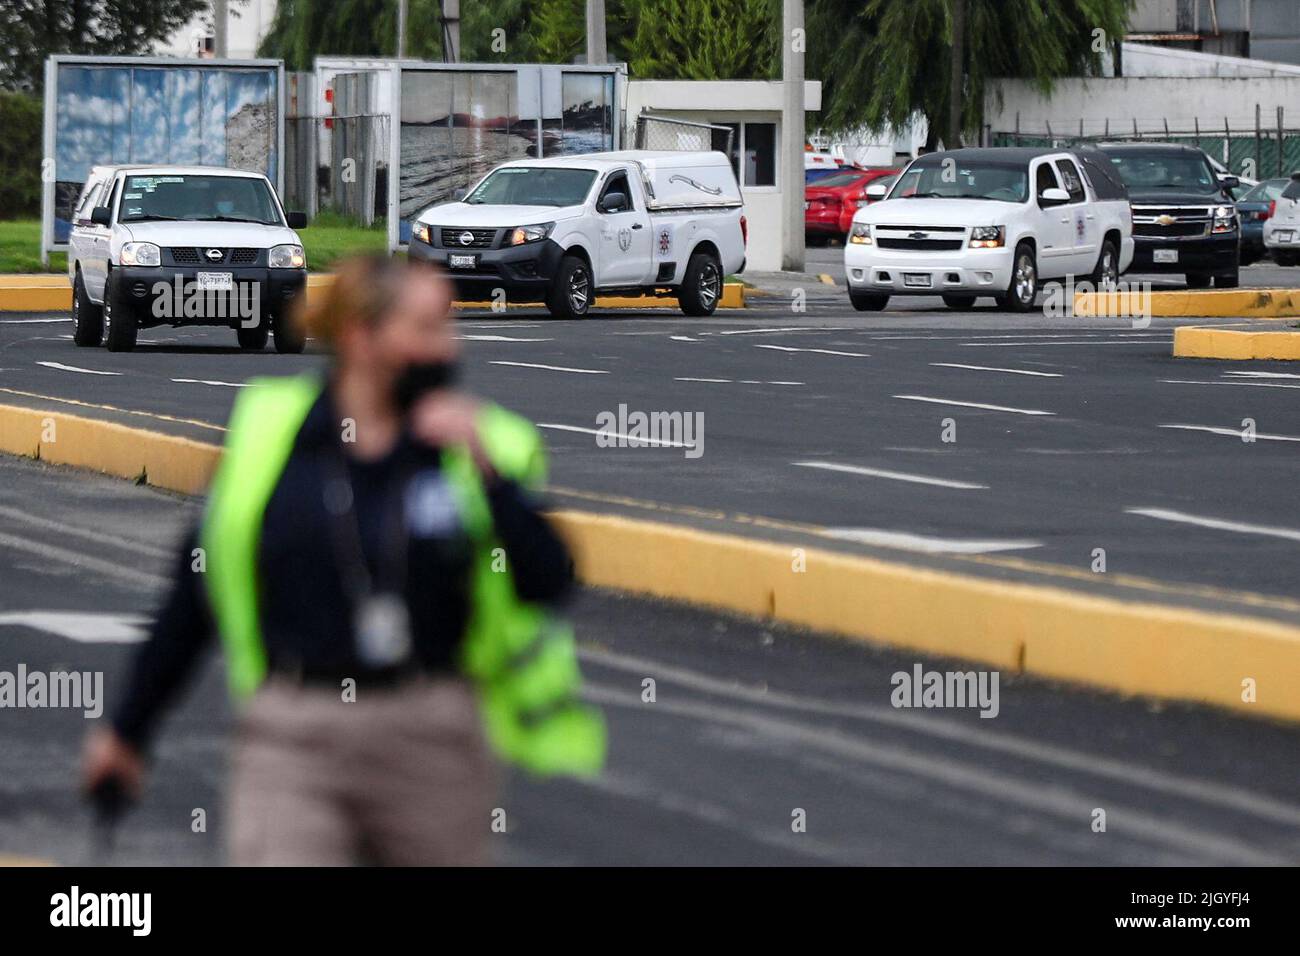 Funeral cars carrying the first bodies of Mexican migrants, who died in a trailer truck in Texas, are seen outside Licenciado Adolfo Lopez Mateos International Airport in Toluca, Mexico, July 13, 2022. REUTERS/Edgard Garrido Stock Photo